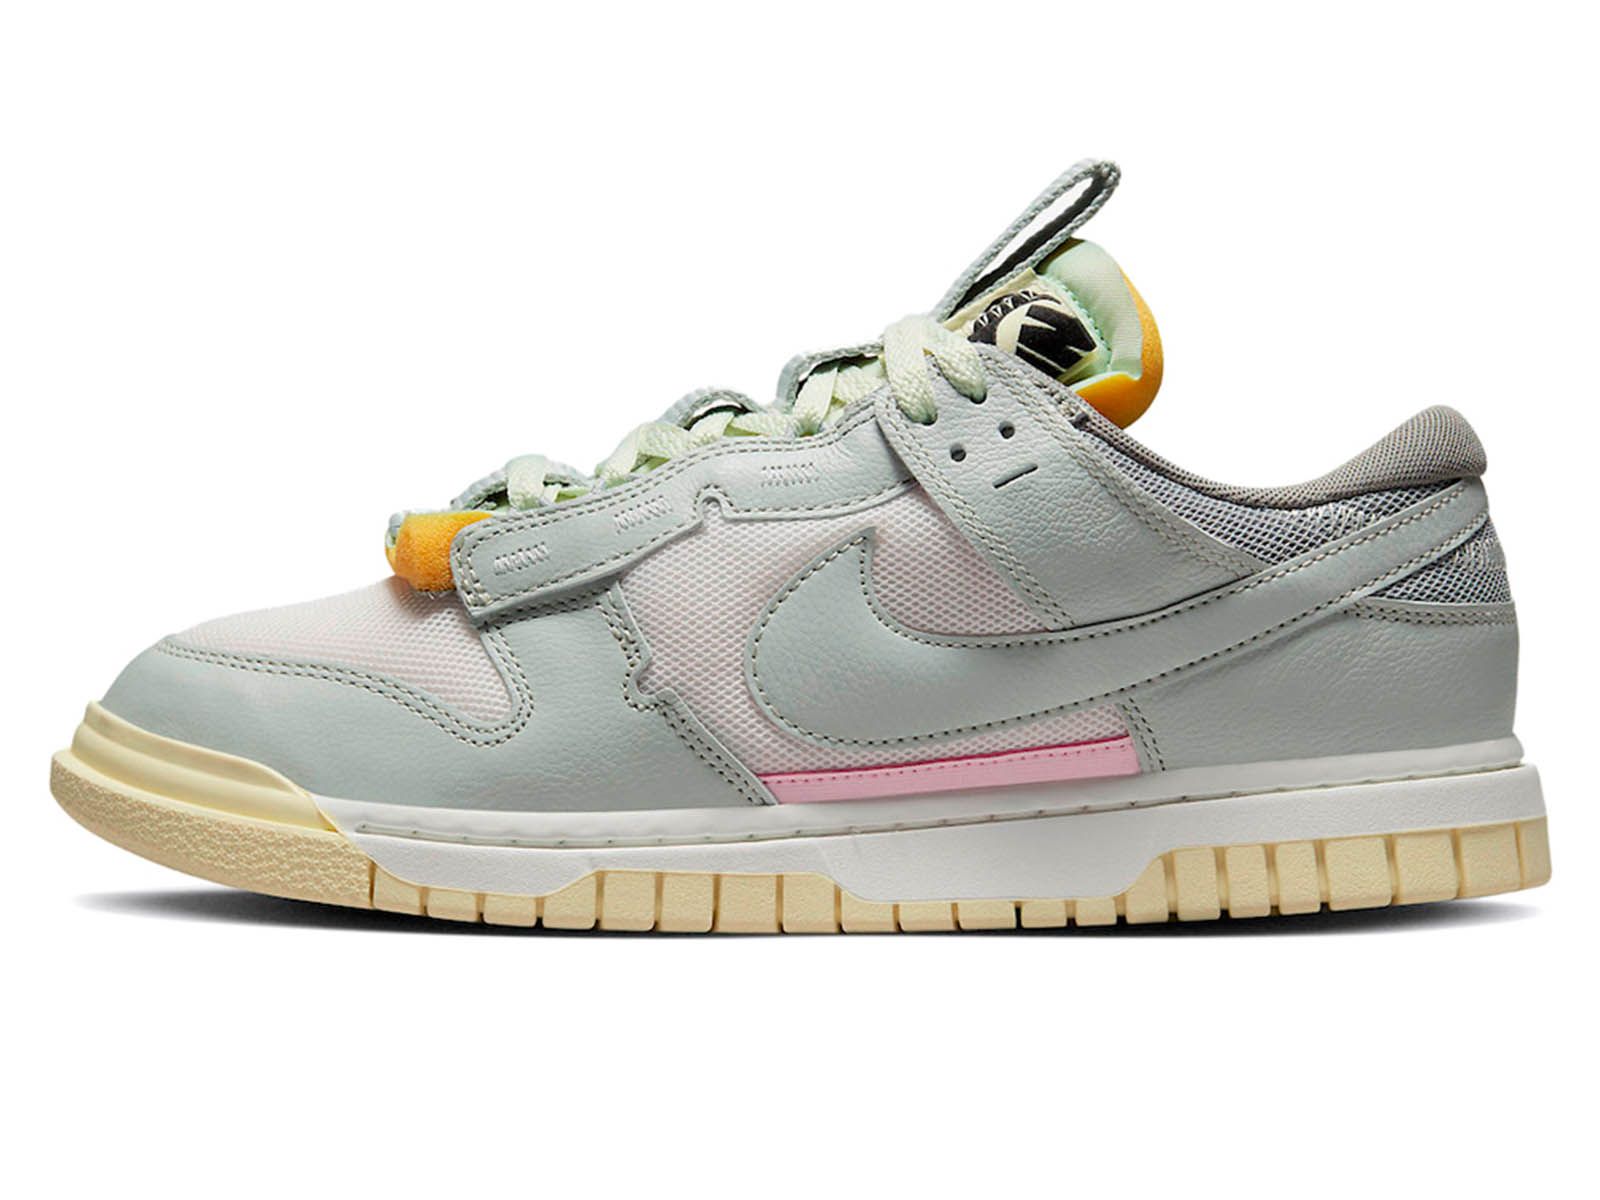 The Nike Dunk Low Remastered arrives in a Mint Foam hue